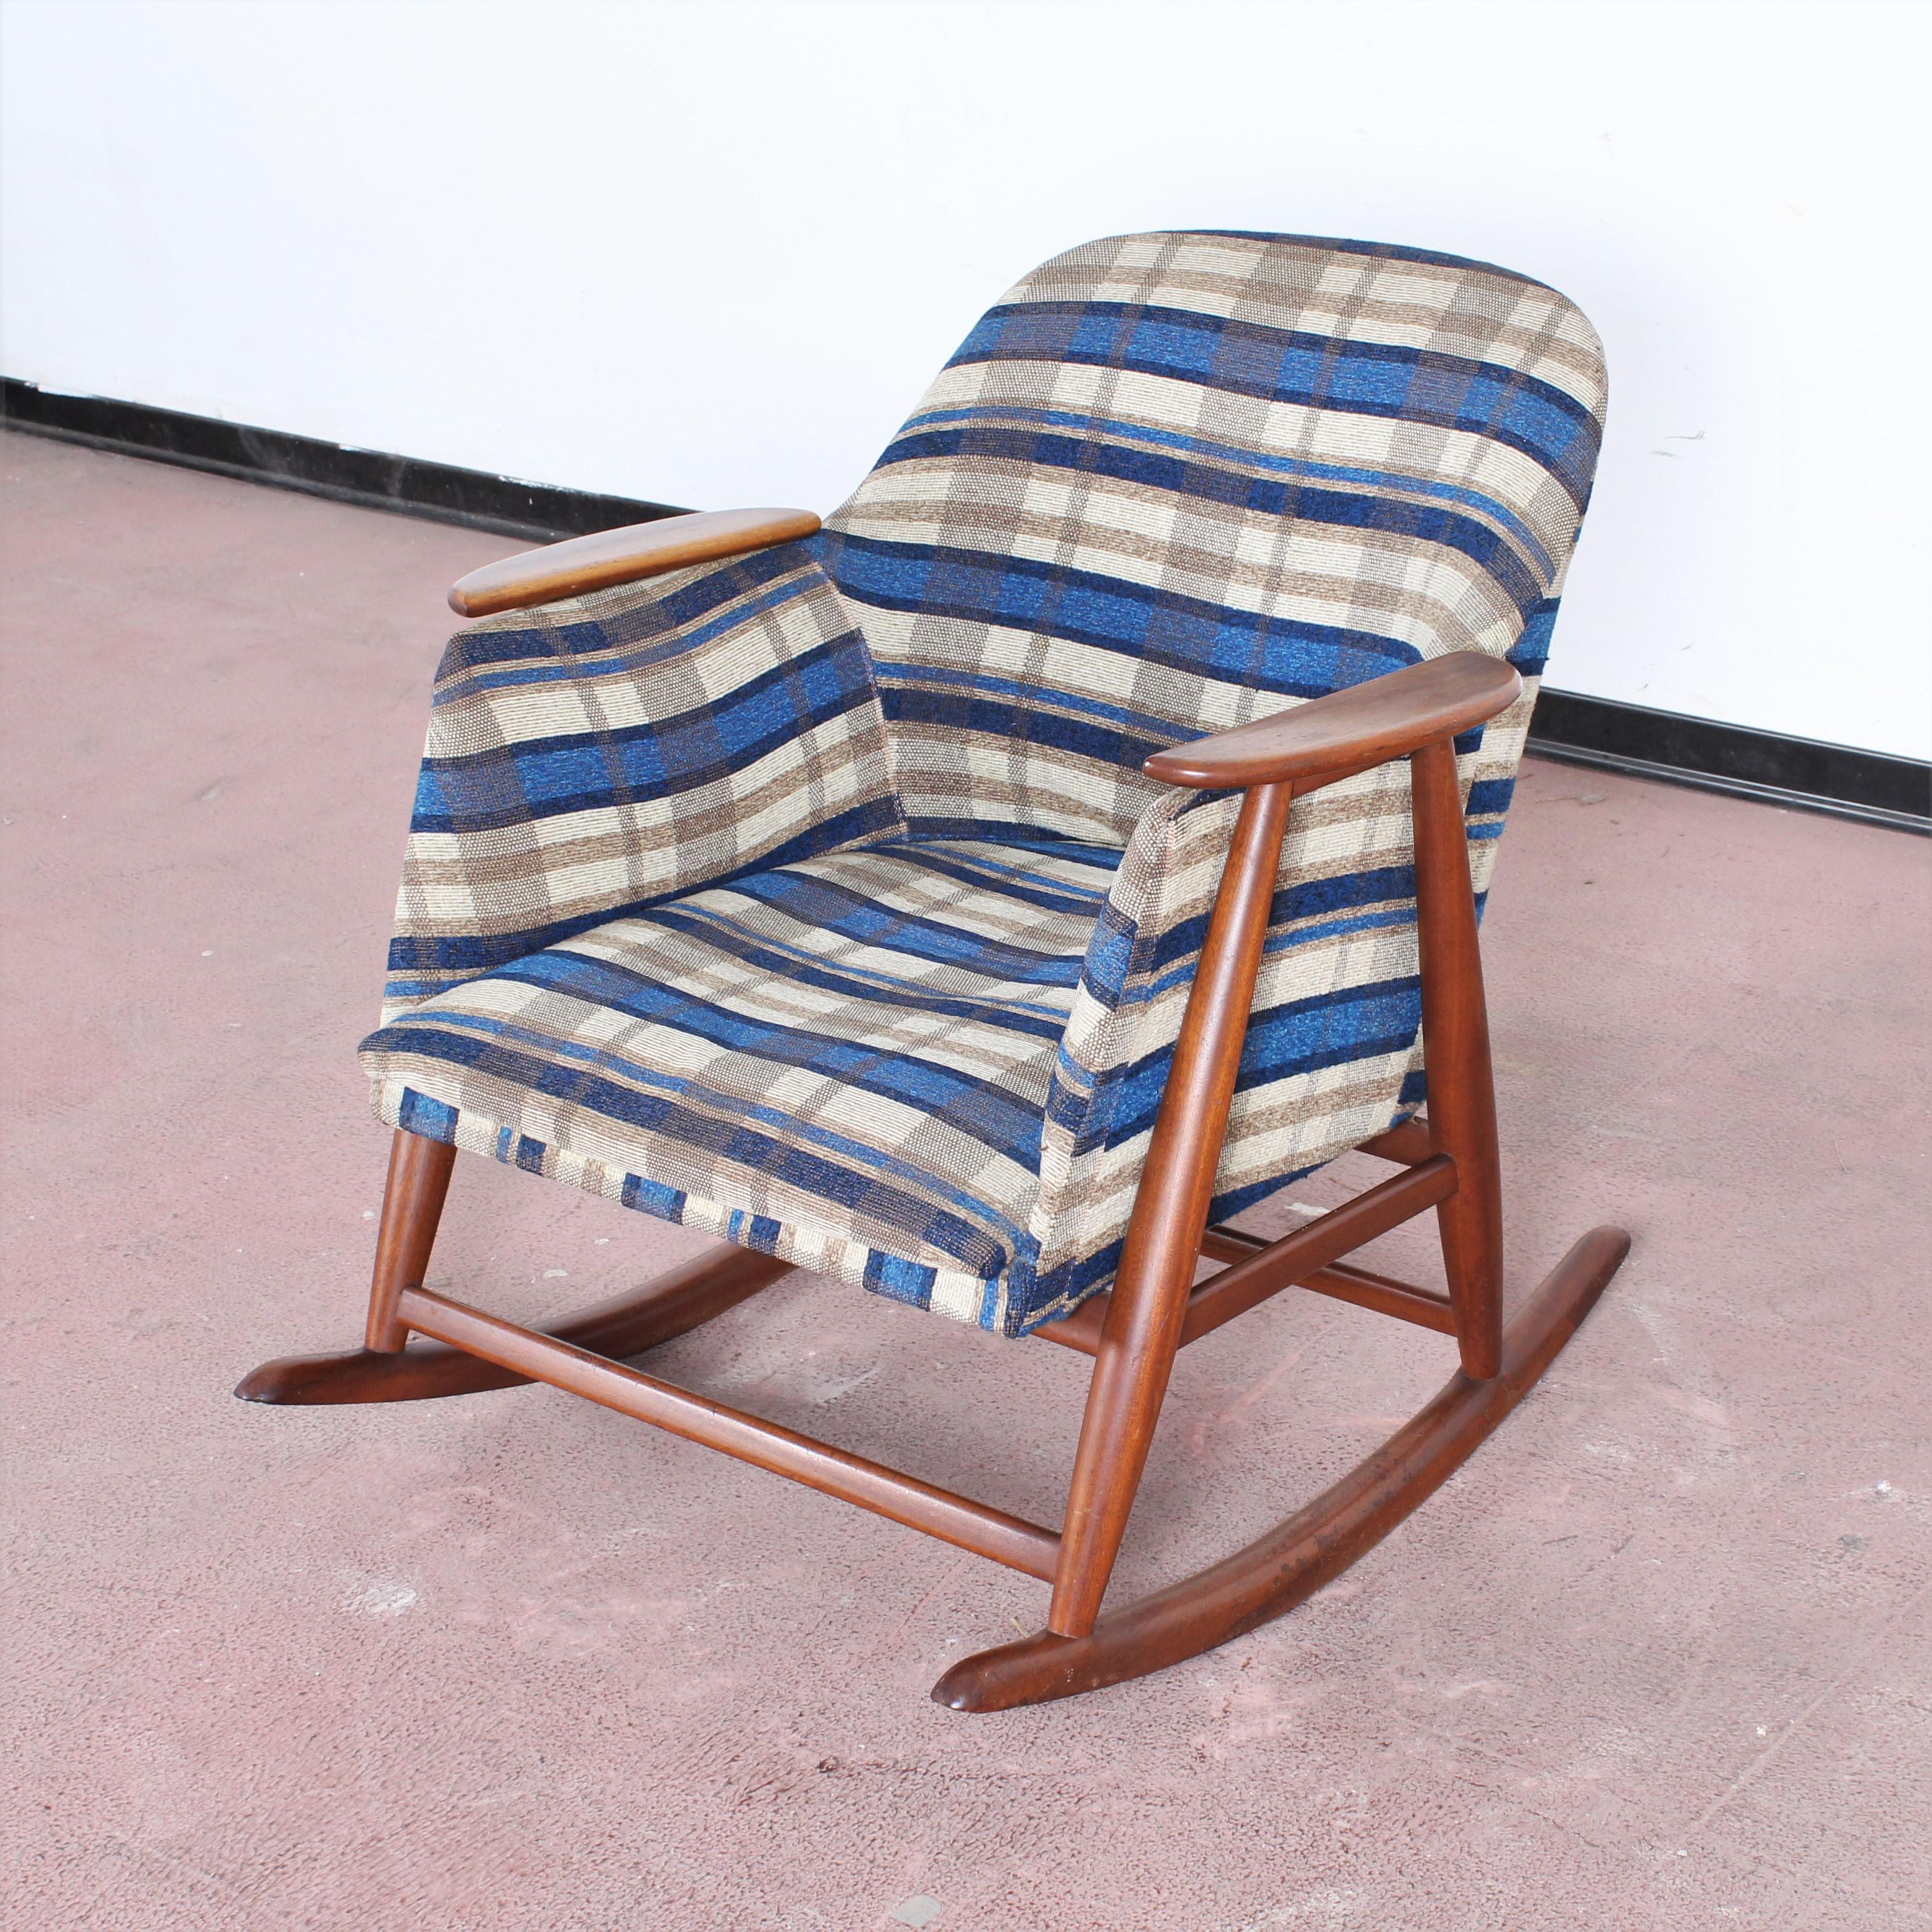 Elegant wooden rocking chair in blue tartan fabric, attribuited to Giangranco Frattini. Italy 1960s
Wear consistent with age and use.